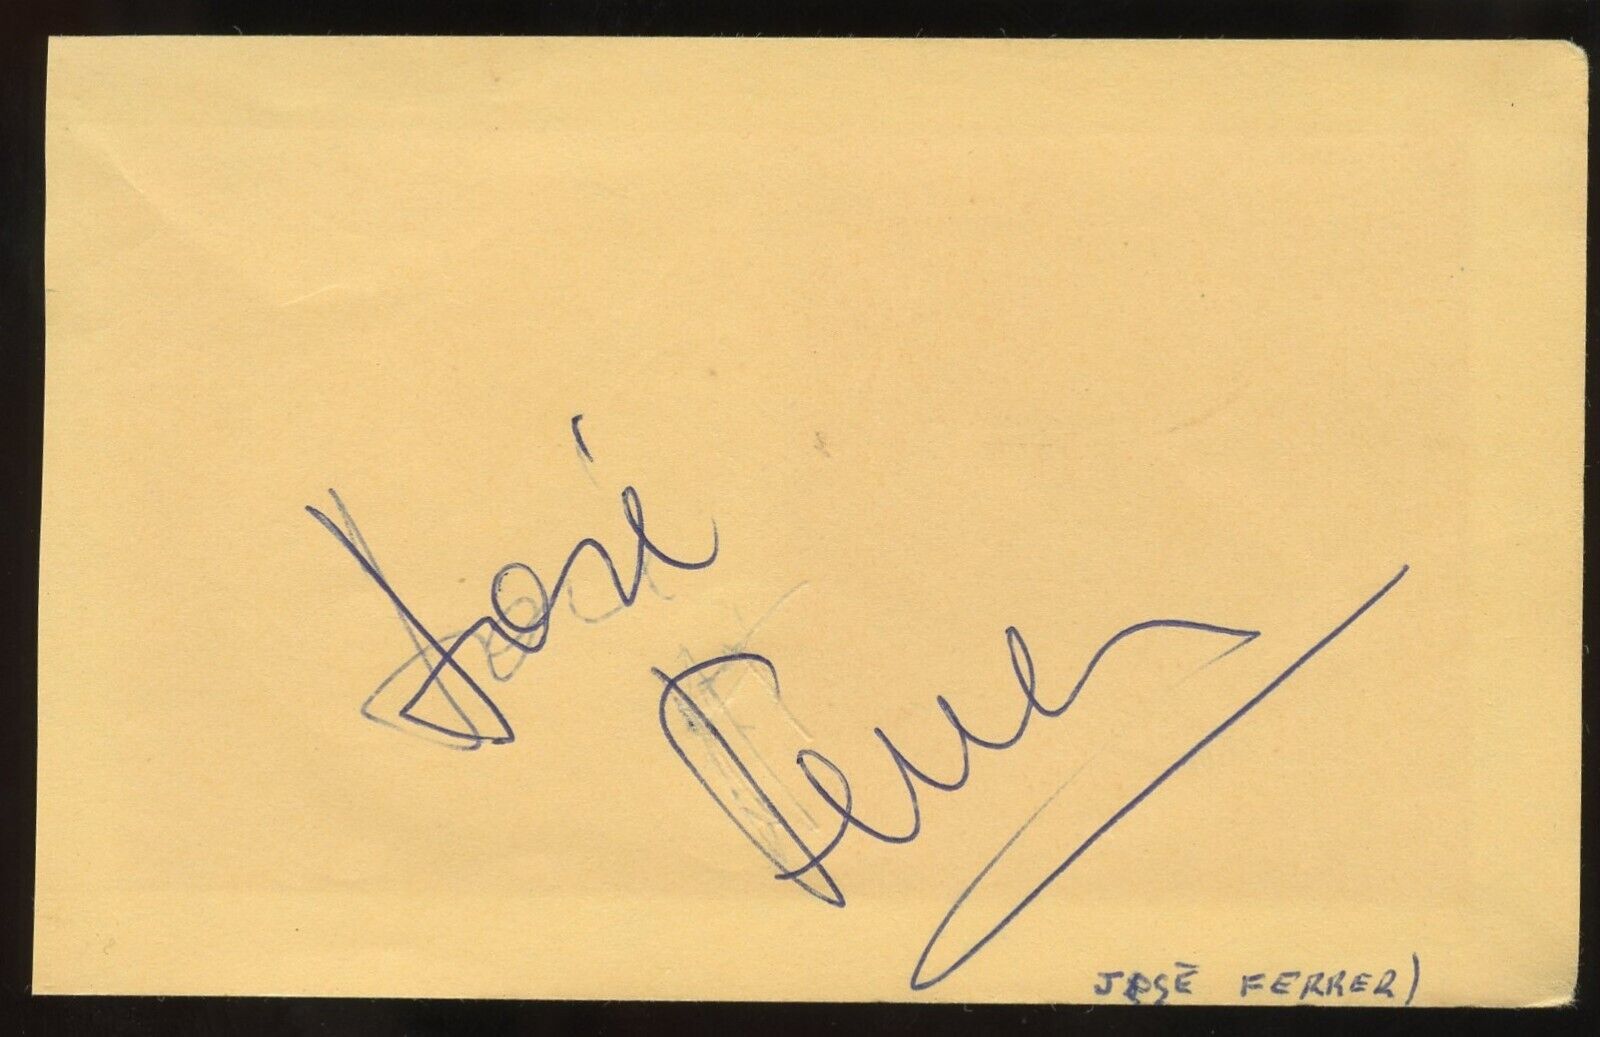 Jose Ferrer d1992 signed autograph 3x5 Cut Puerto Rican Actor Director of Stage